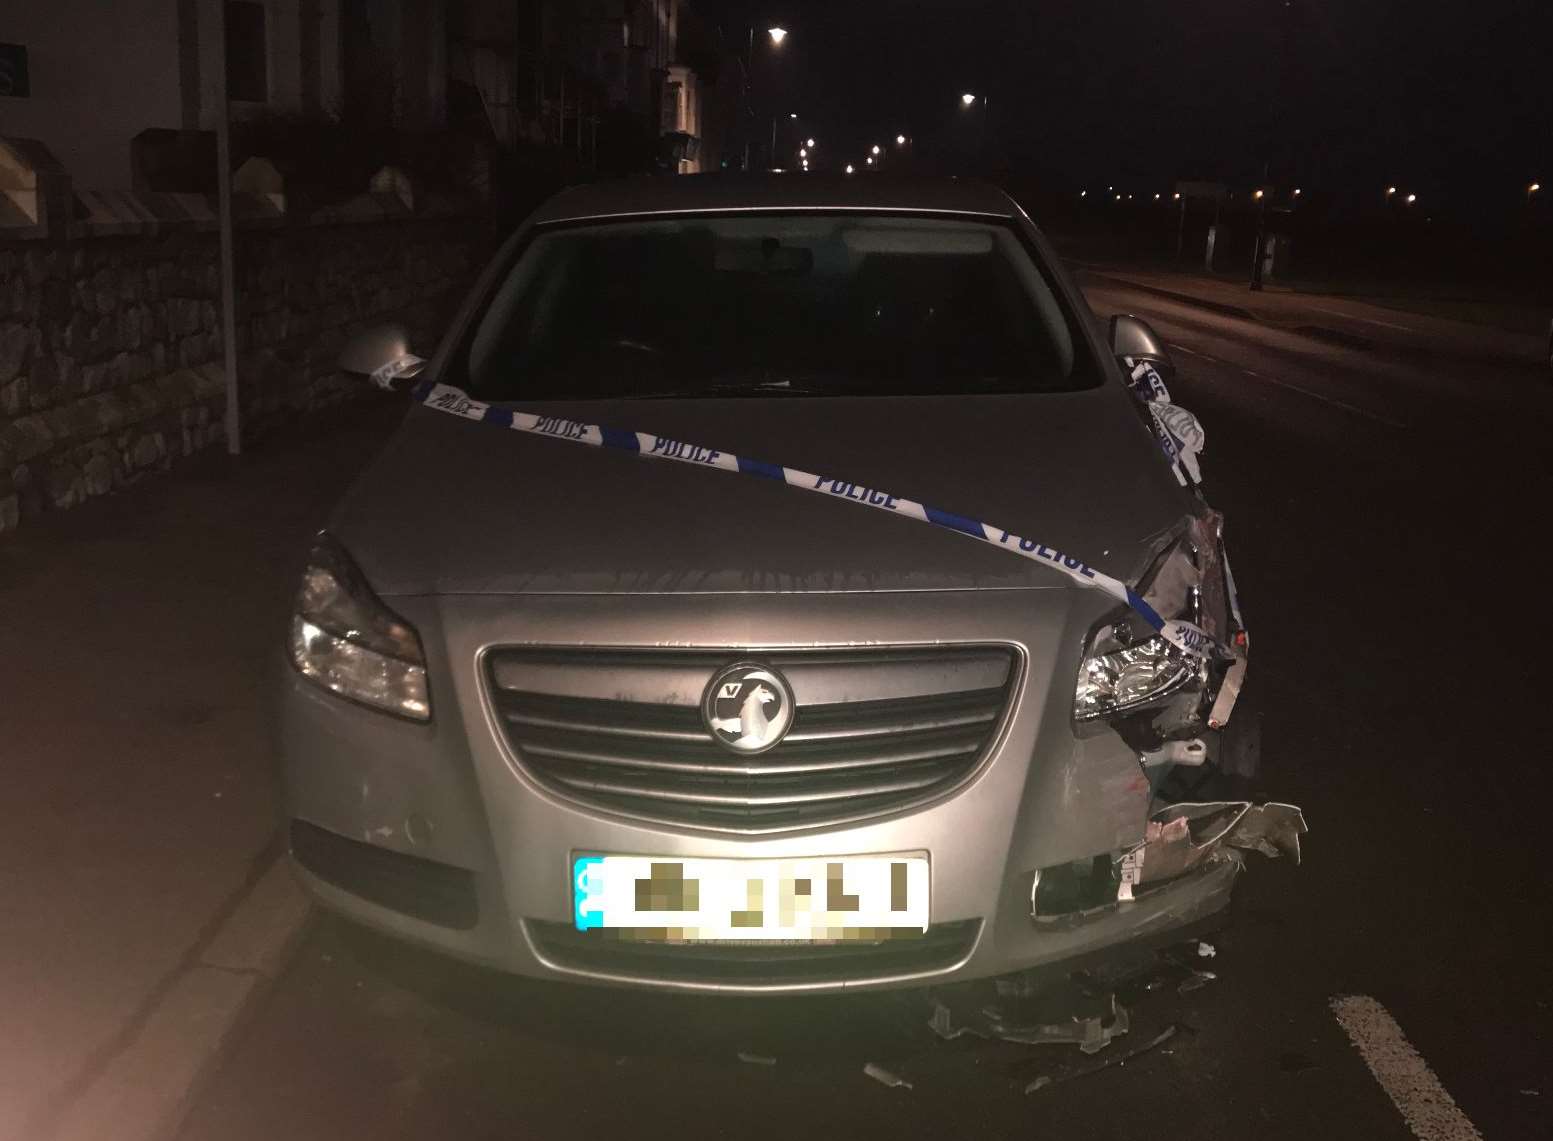 Two parked cars were damaged in the incident